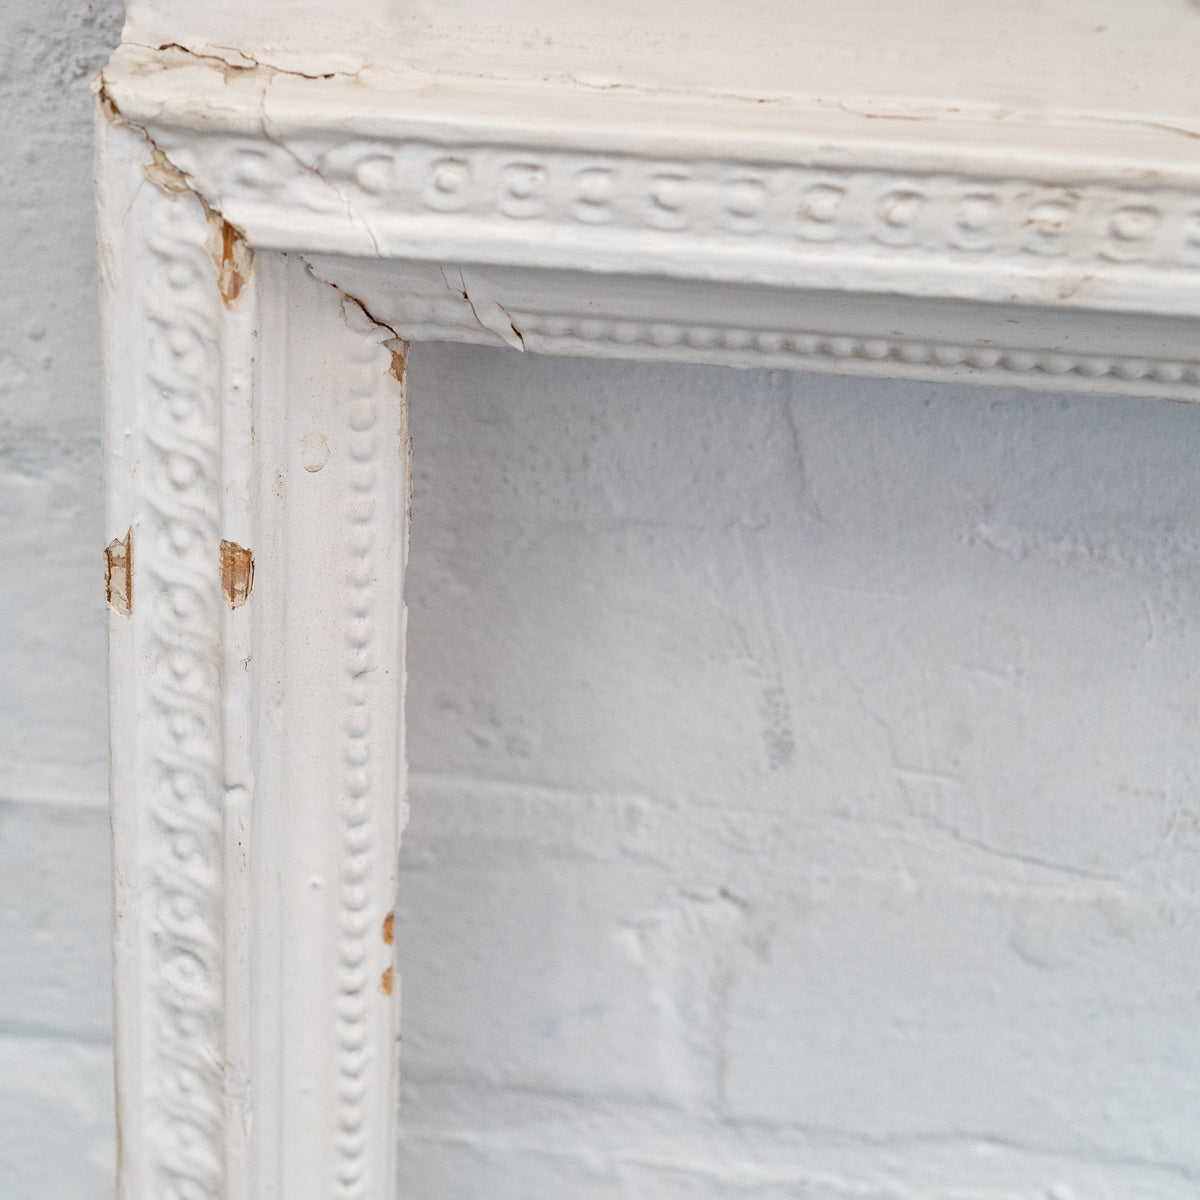 Antique Edwardian Wooden Fireplace Surround | The Architectural Forum